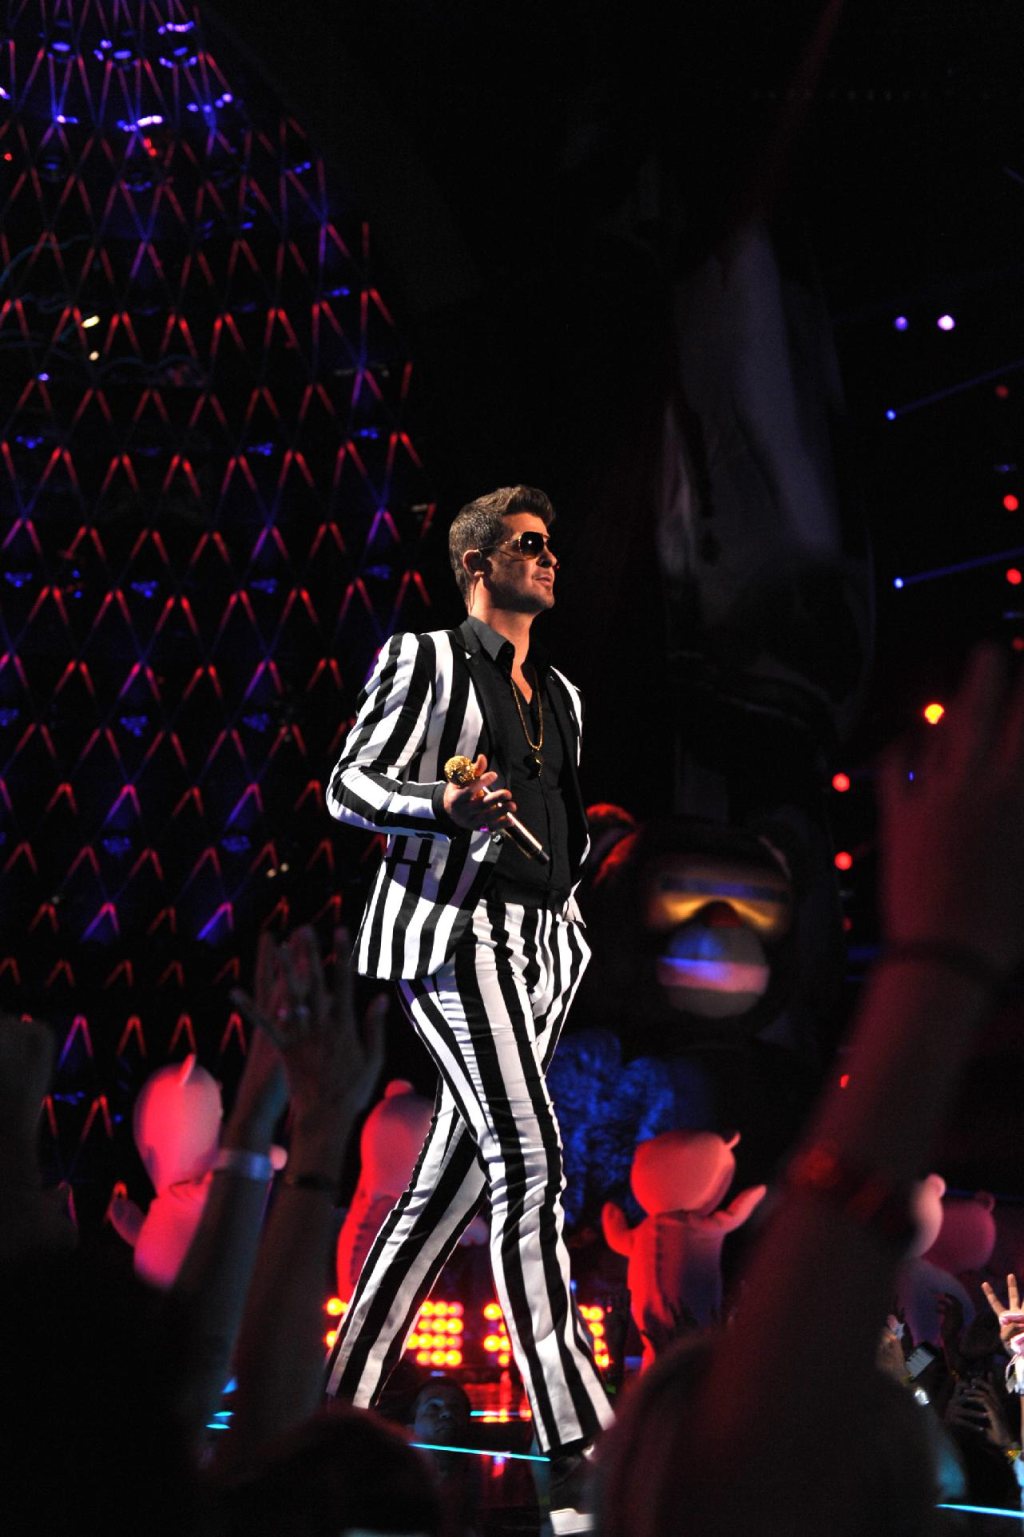 Robin Thicke photo 15 of 30 pics, wallpaper - photo #629588 - ThePlace2